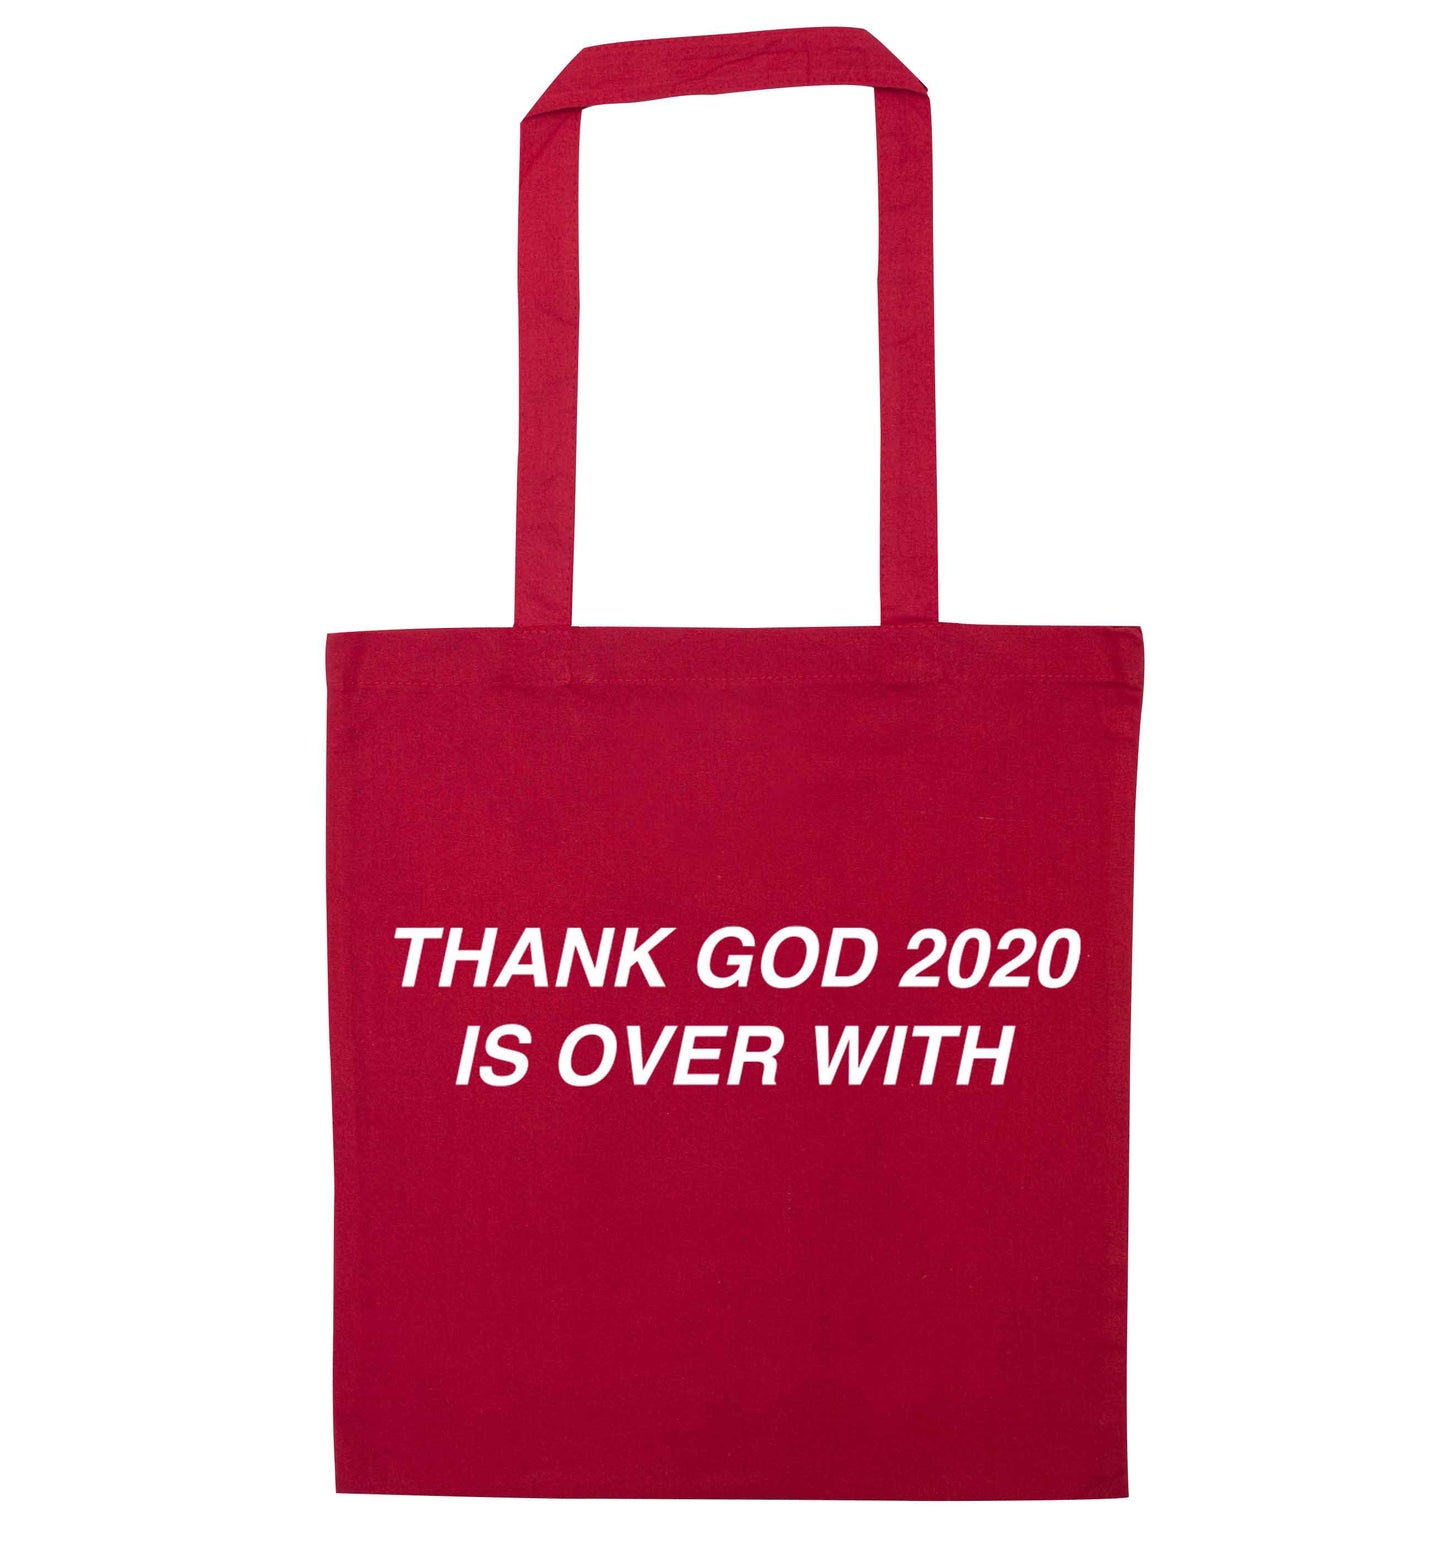 Thank god 2020 is over with red tote bag